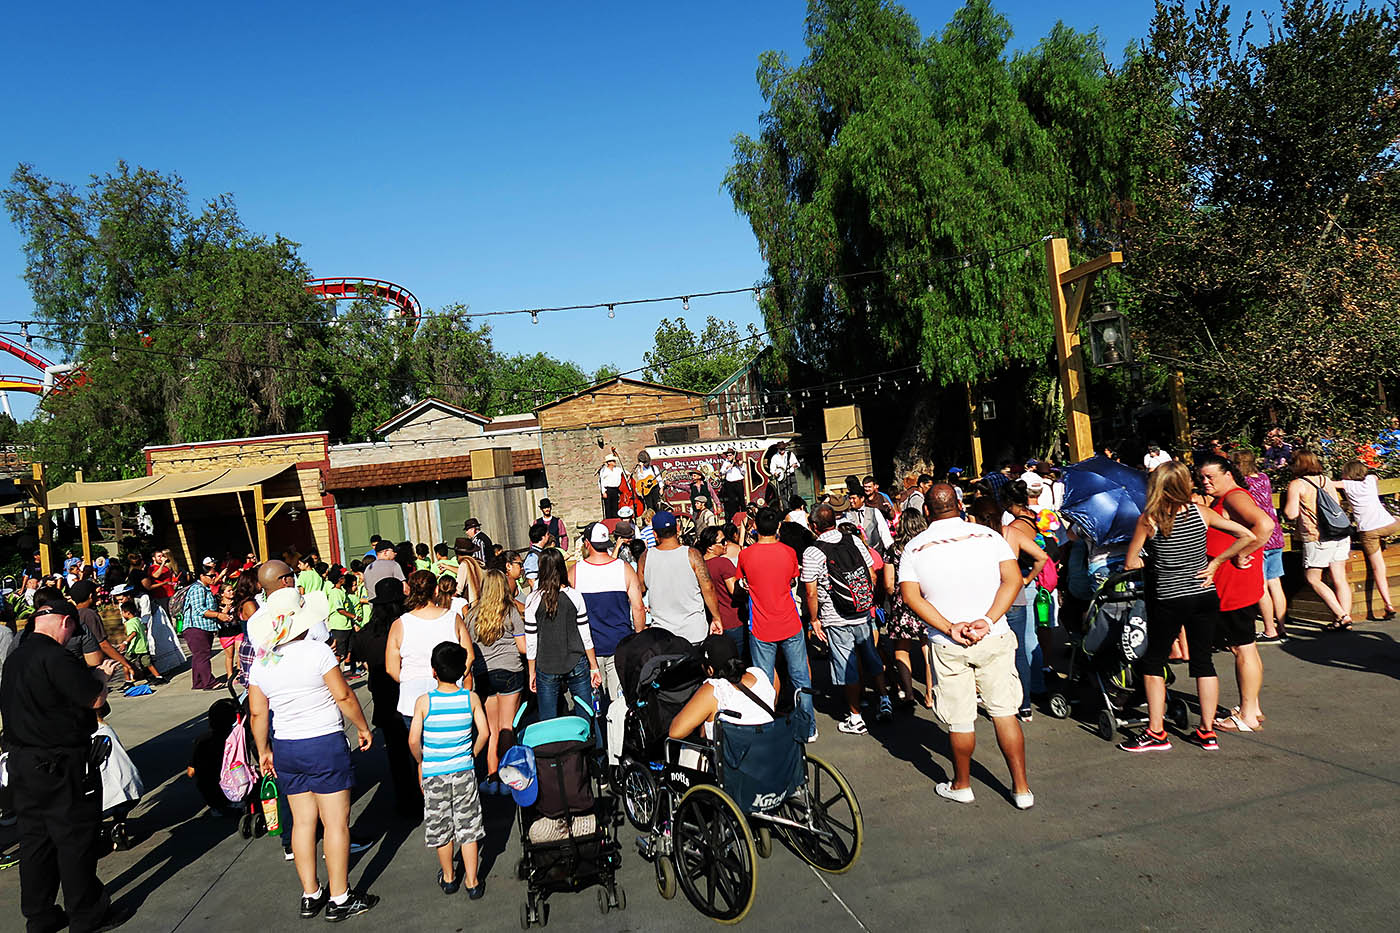 Why You Should Visit Knott's Berry Farm Before Summer Is Over